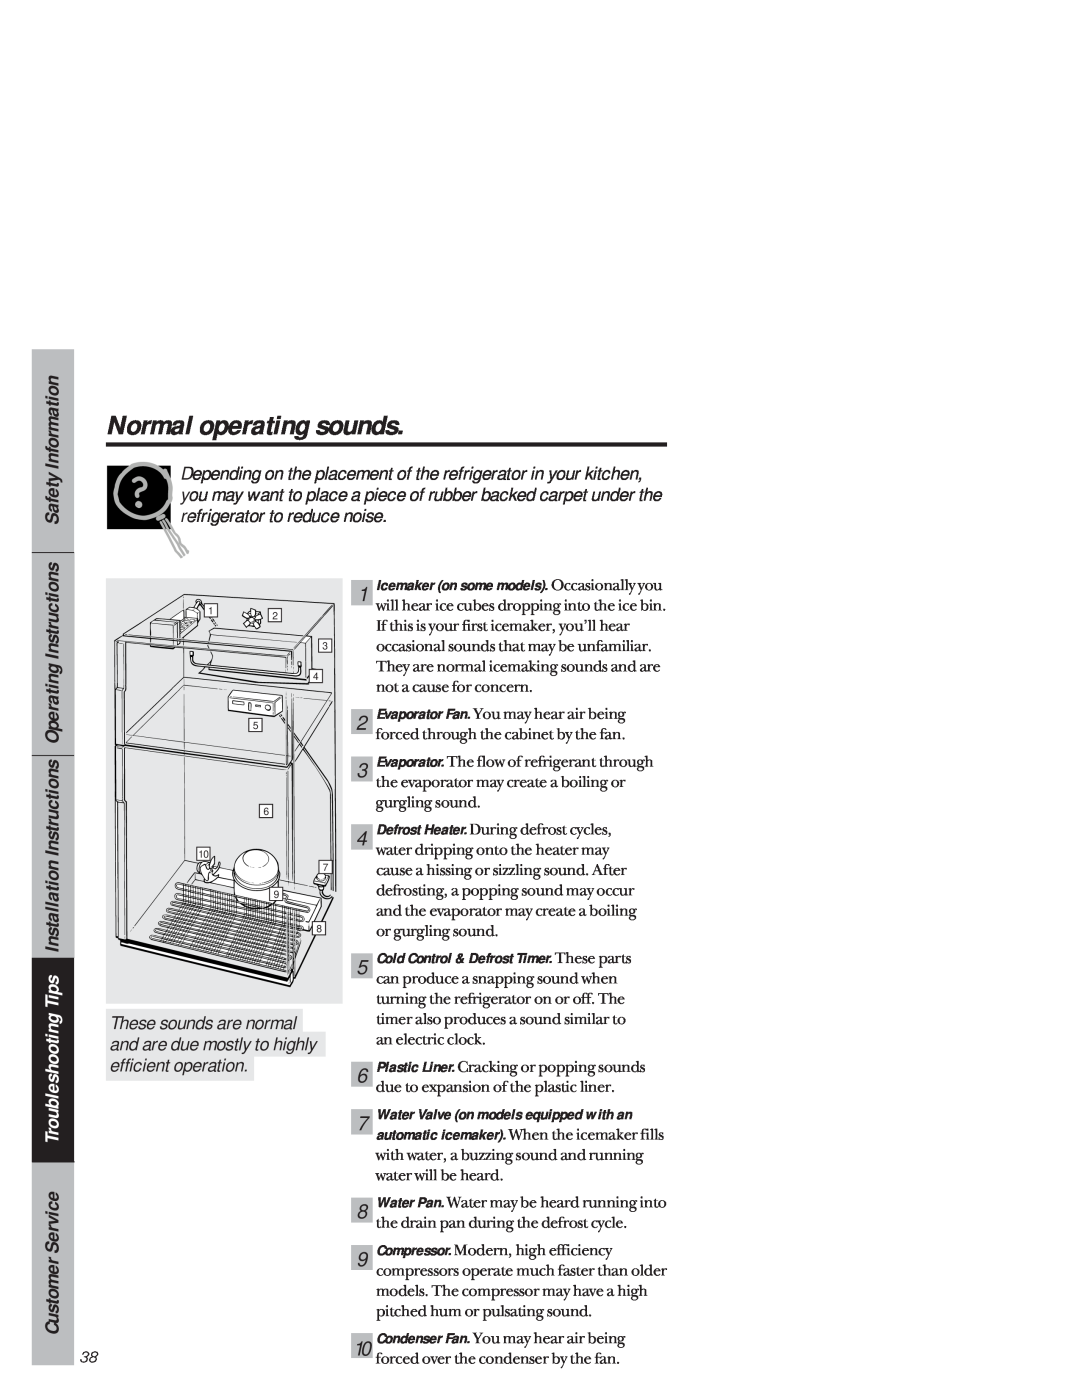 GE 1825 owner manual Normal operating sounds, Safety Information 